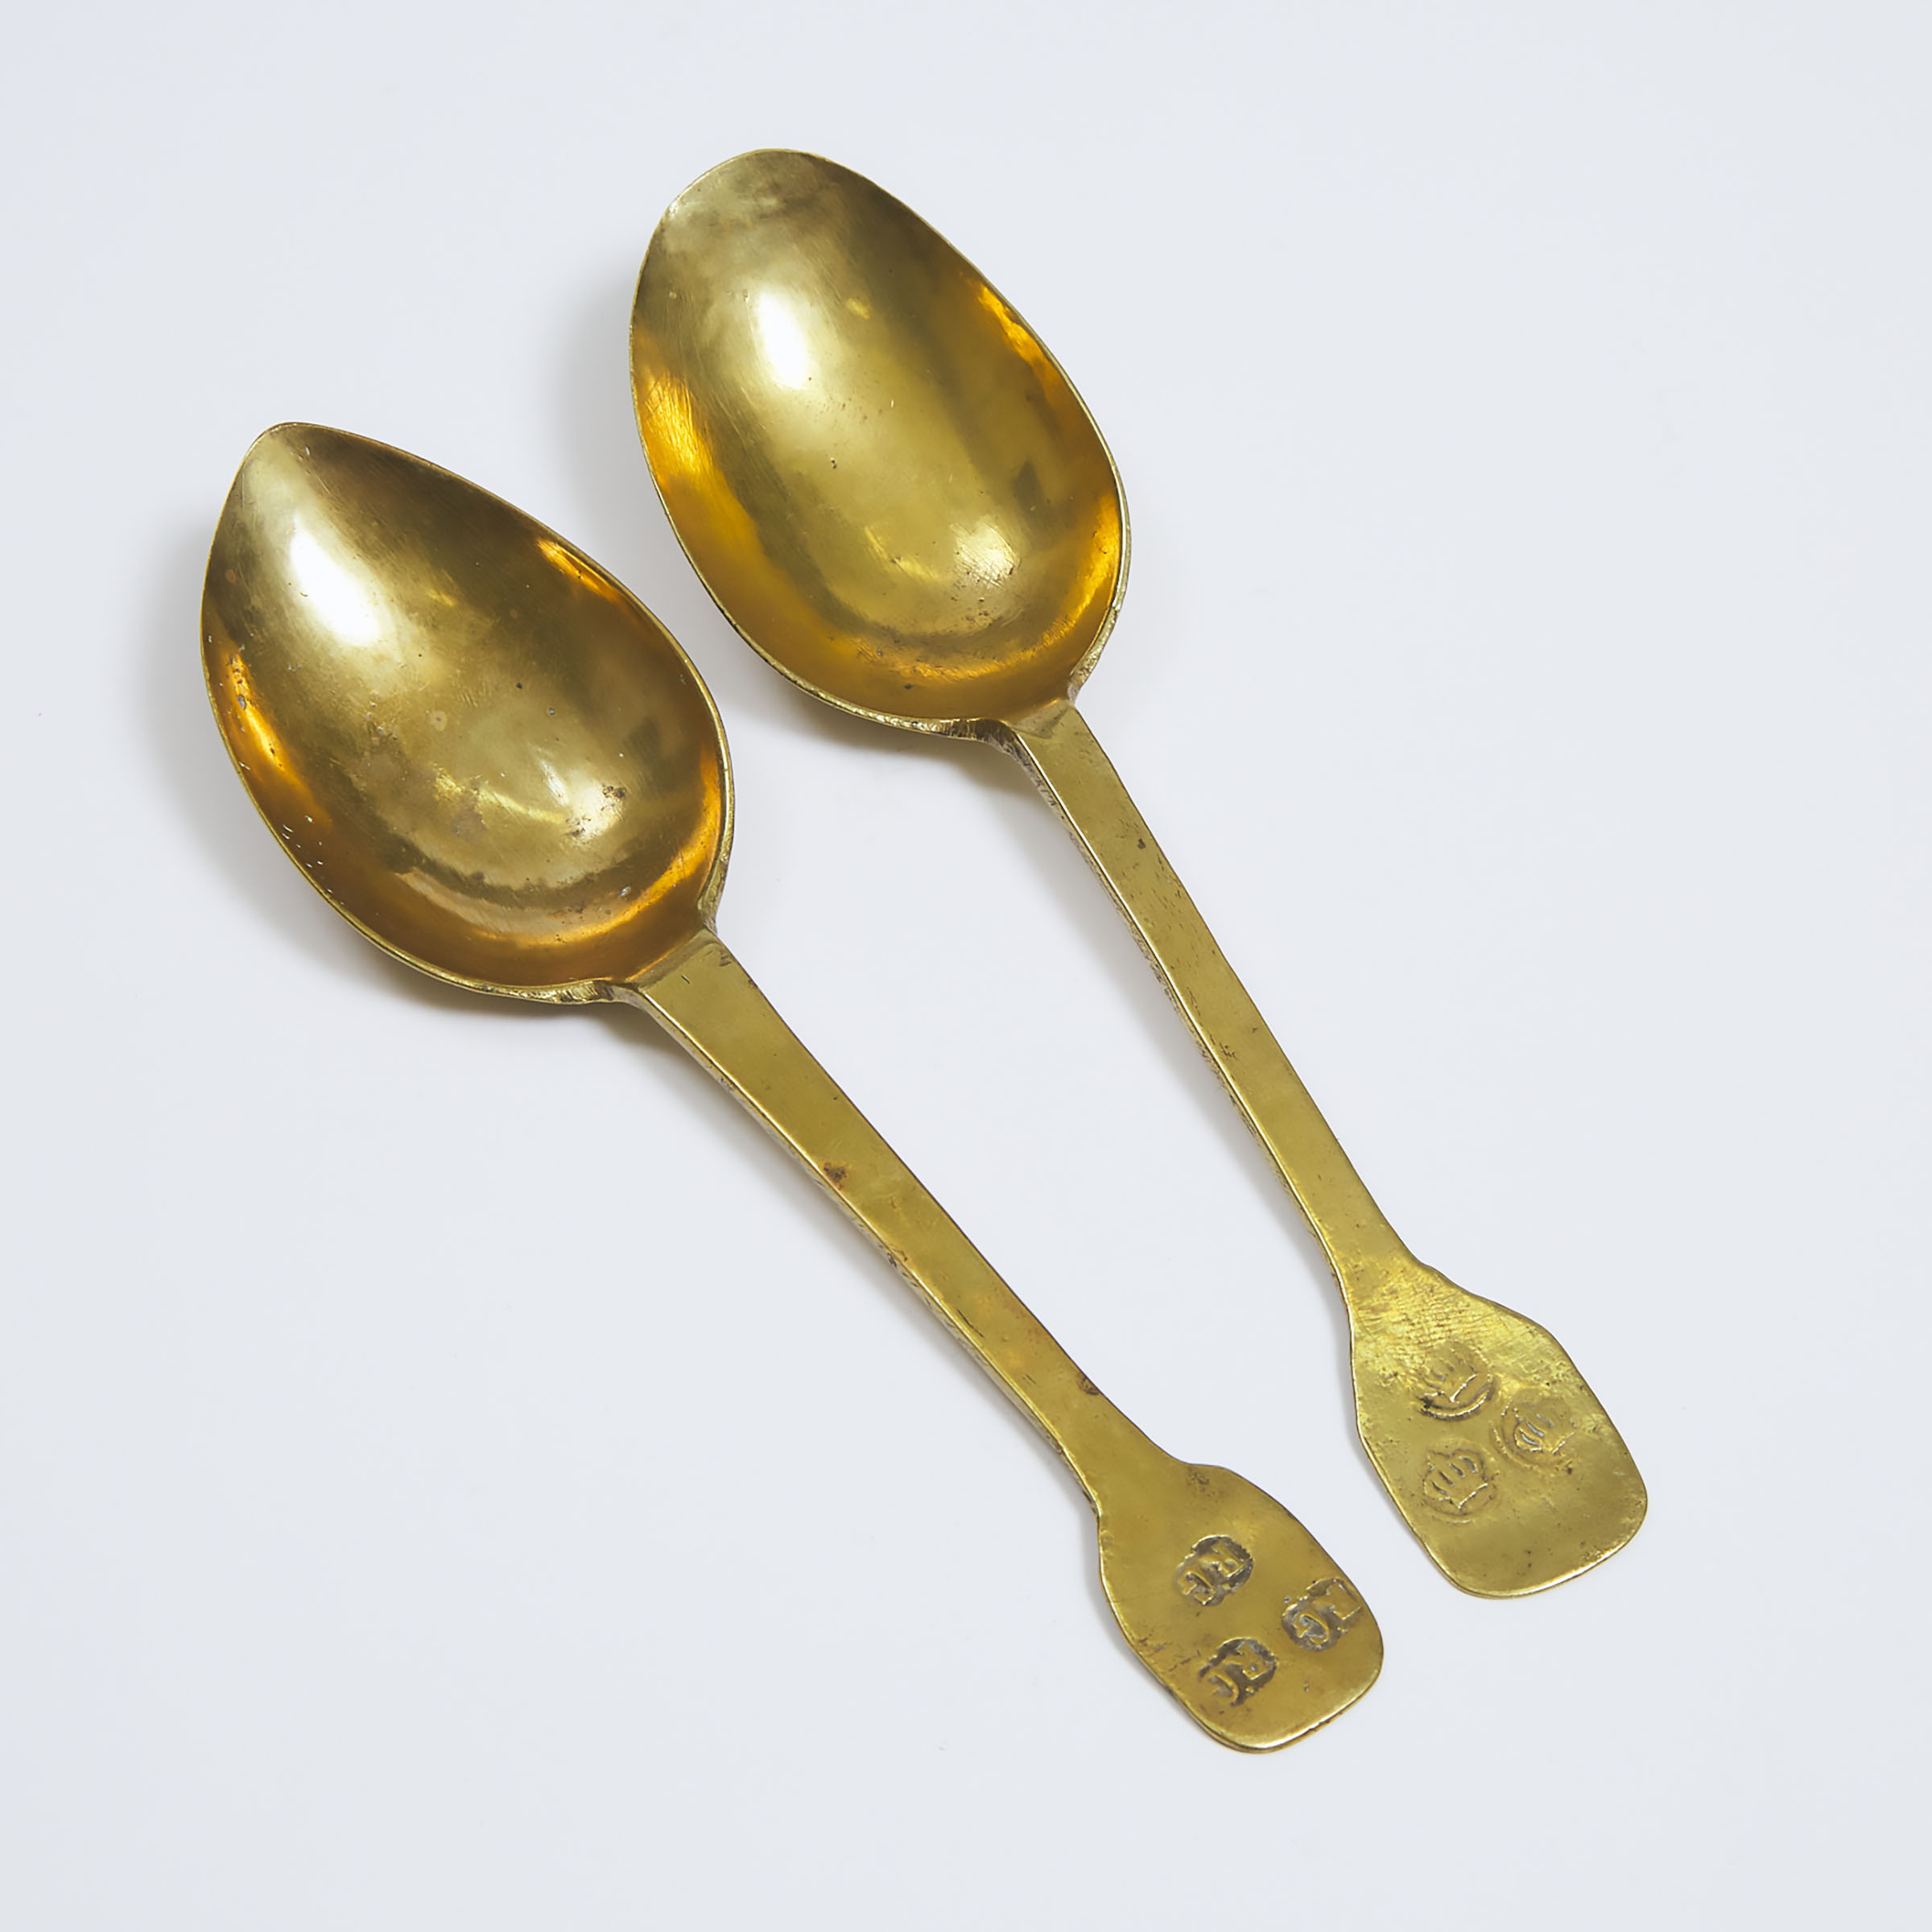 Two French Latten Table Spoons, early 17th century